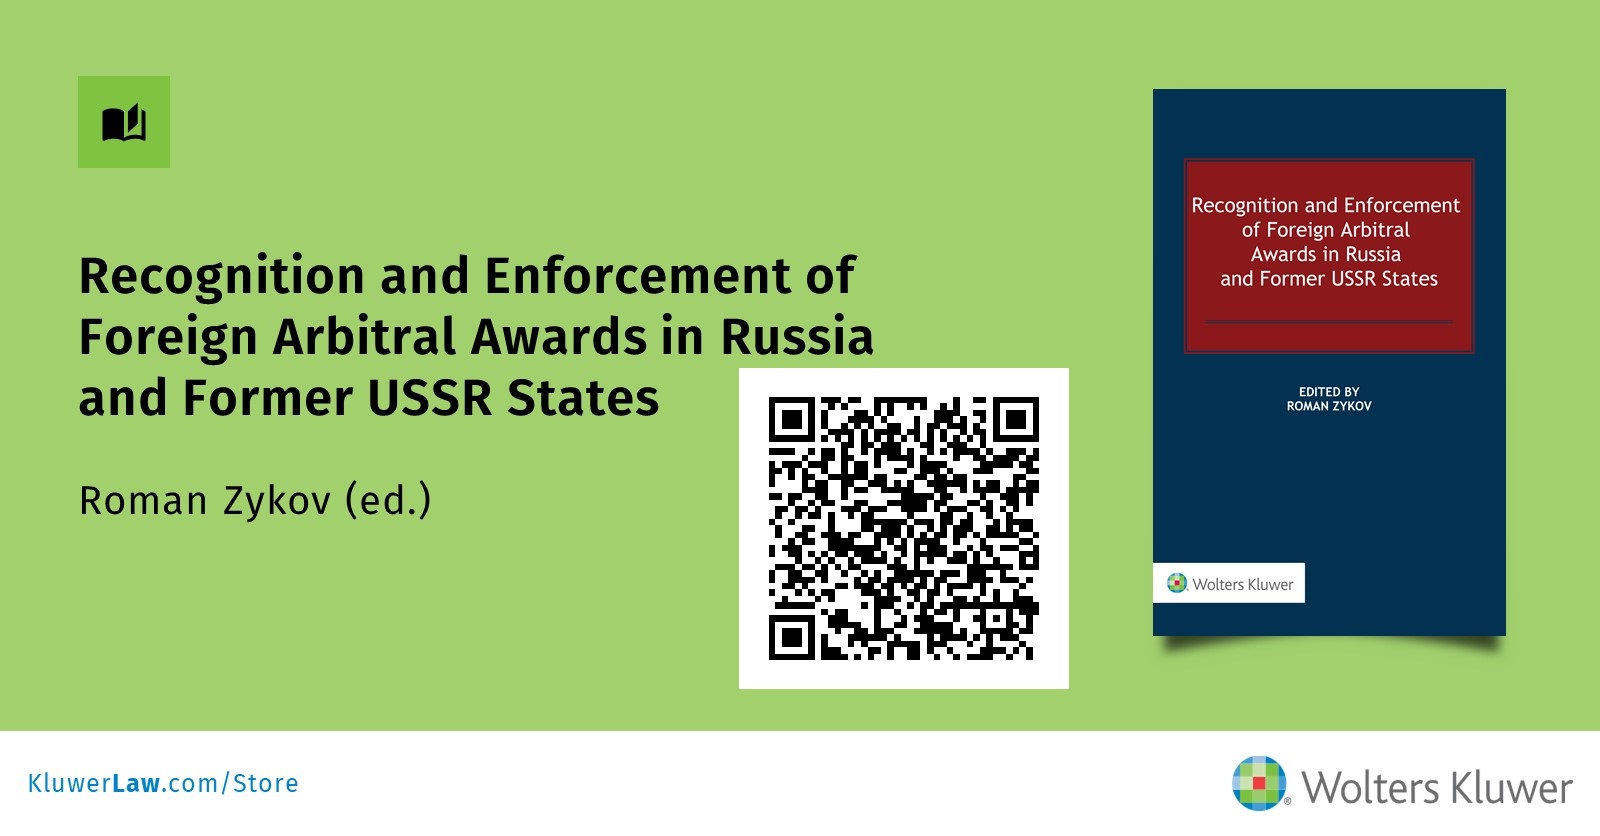 Recognition and Enforcement of Foreign Arbitral Awards in Russia and Former USSR States